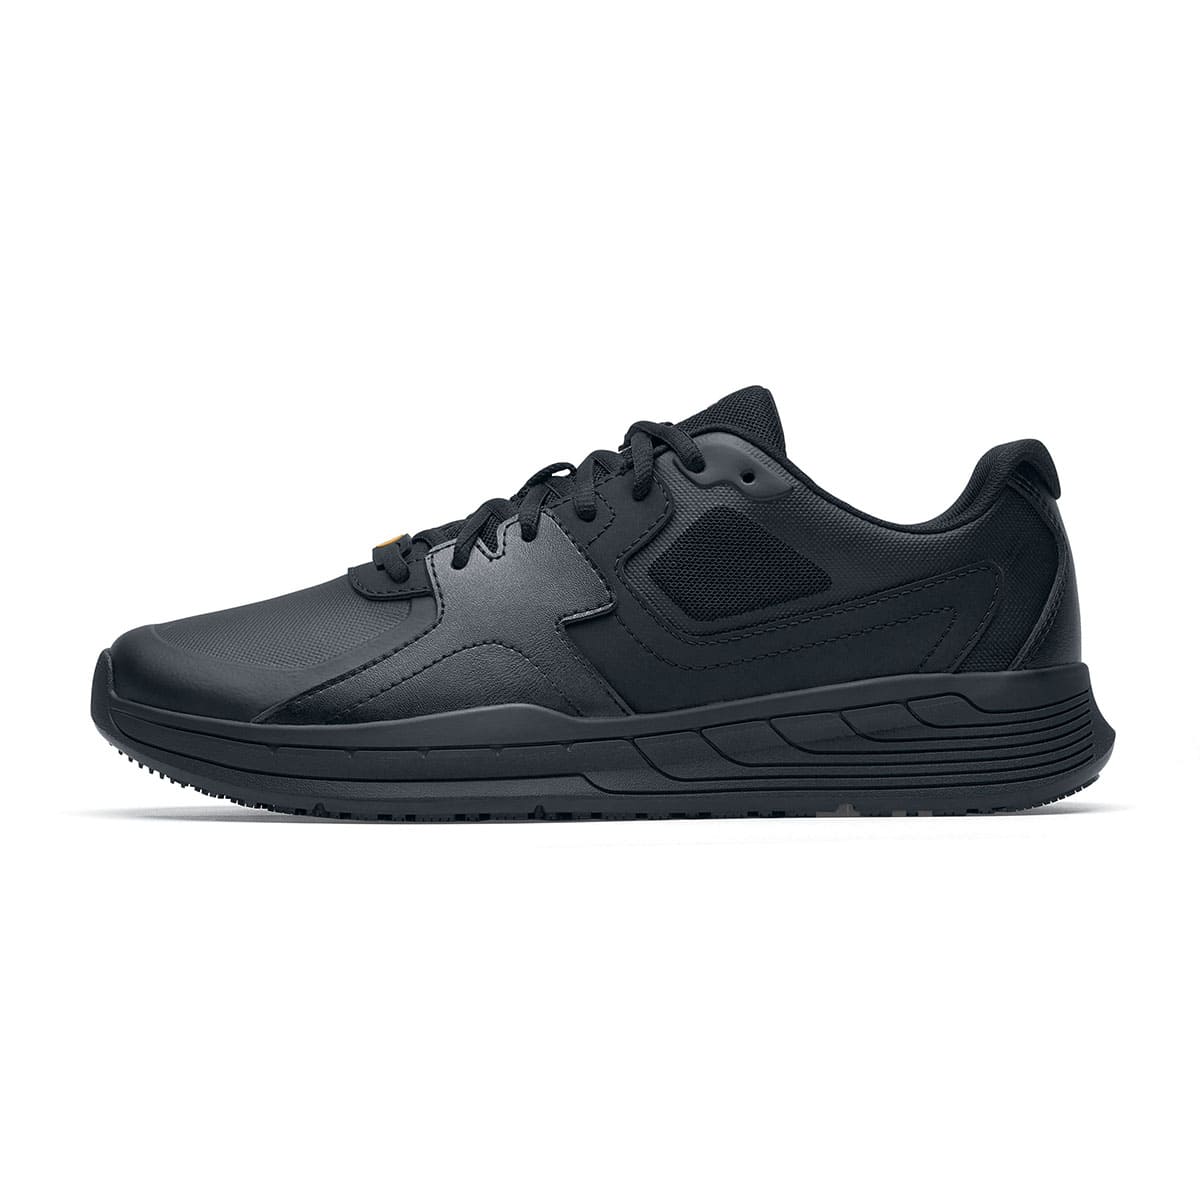 The Shoes for Crews Condor II Unisex Black trainers feature a slip-resistant outsole and an easy-to-clean, breathable fabric upper with SpillGuard protection, seen from the lrft.